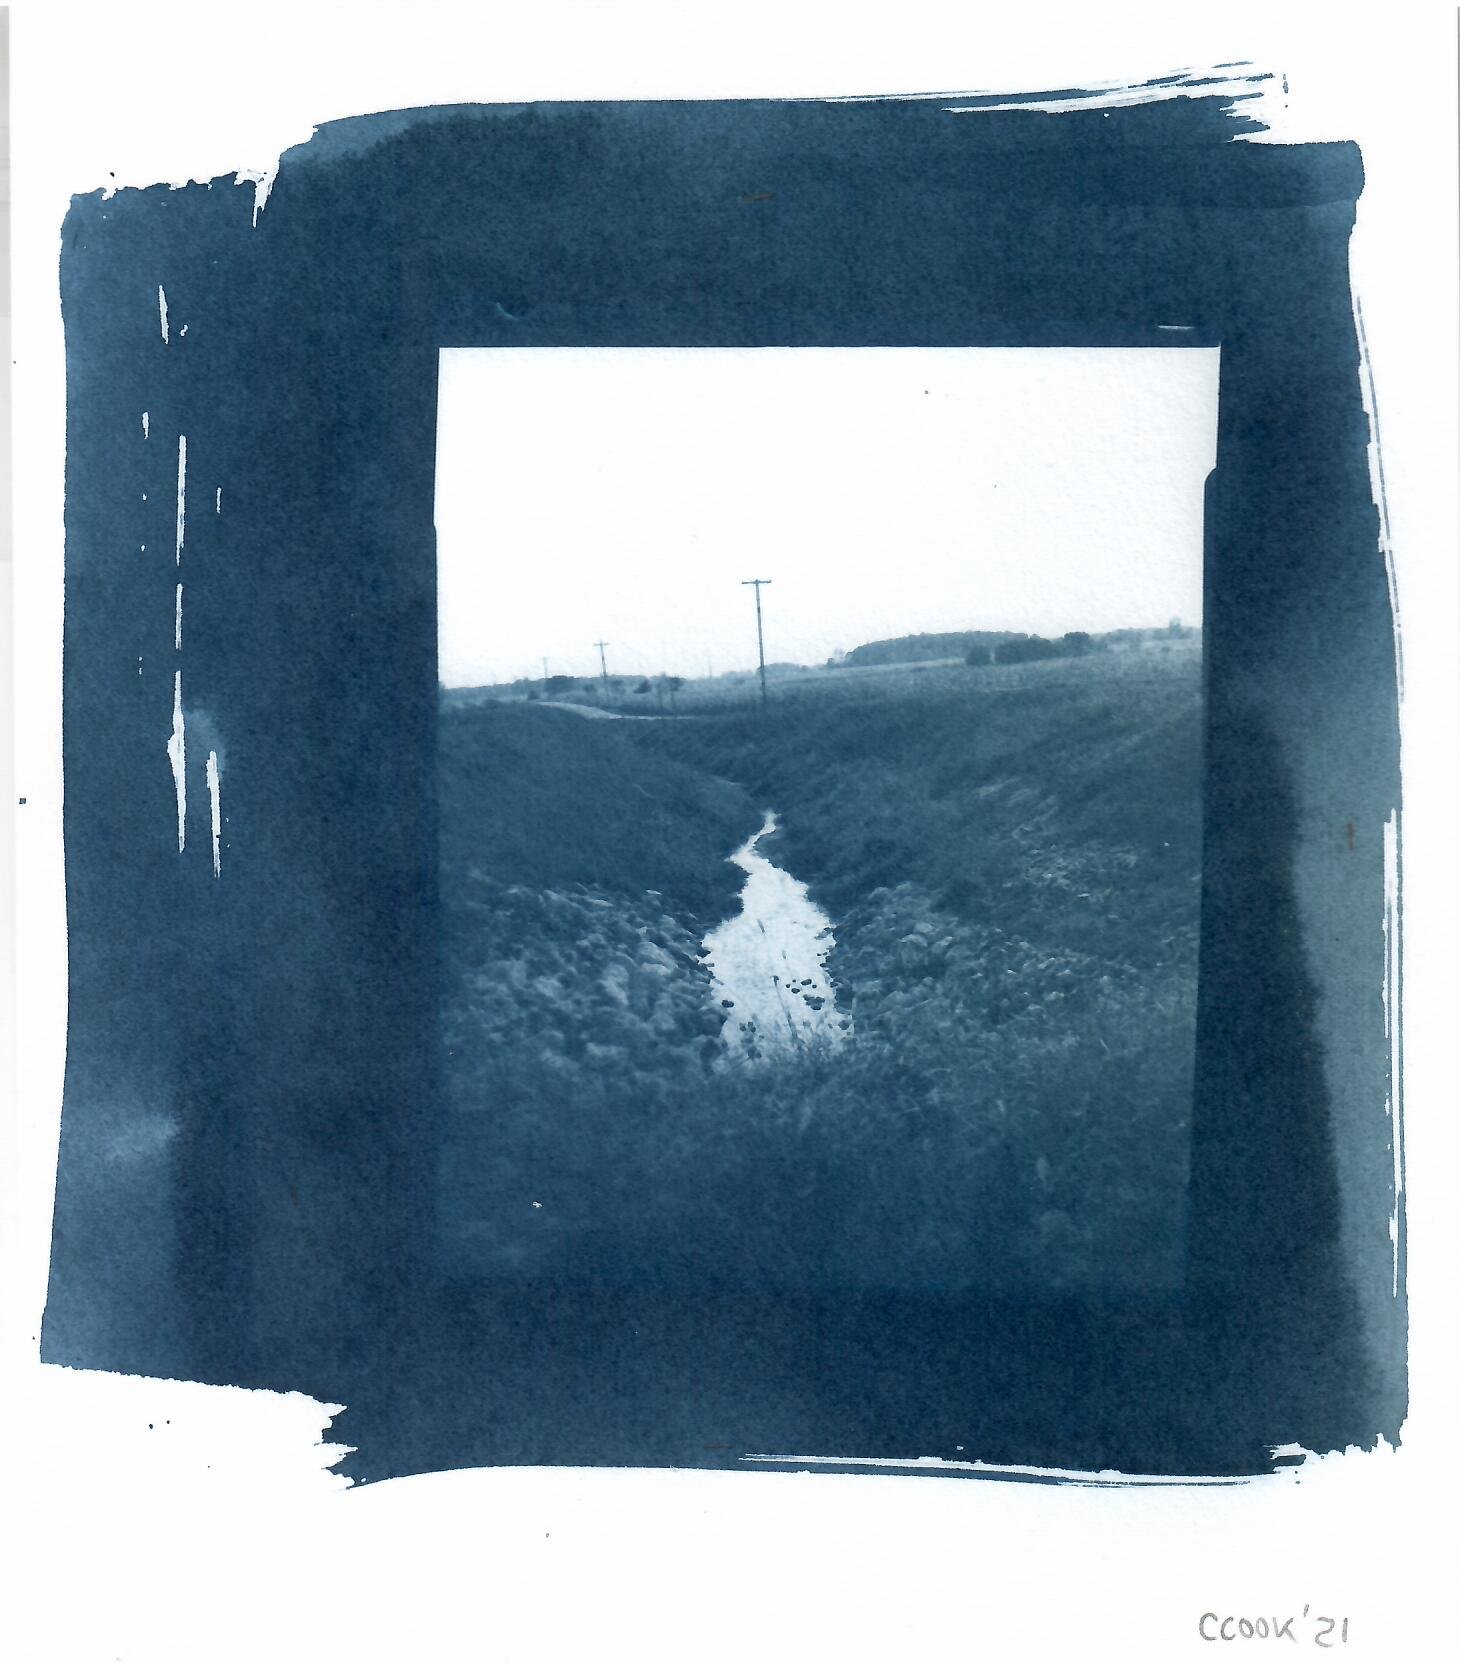  large format (4x5 inches) film cyanotype contact print . 